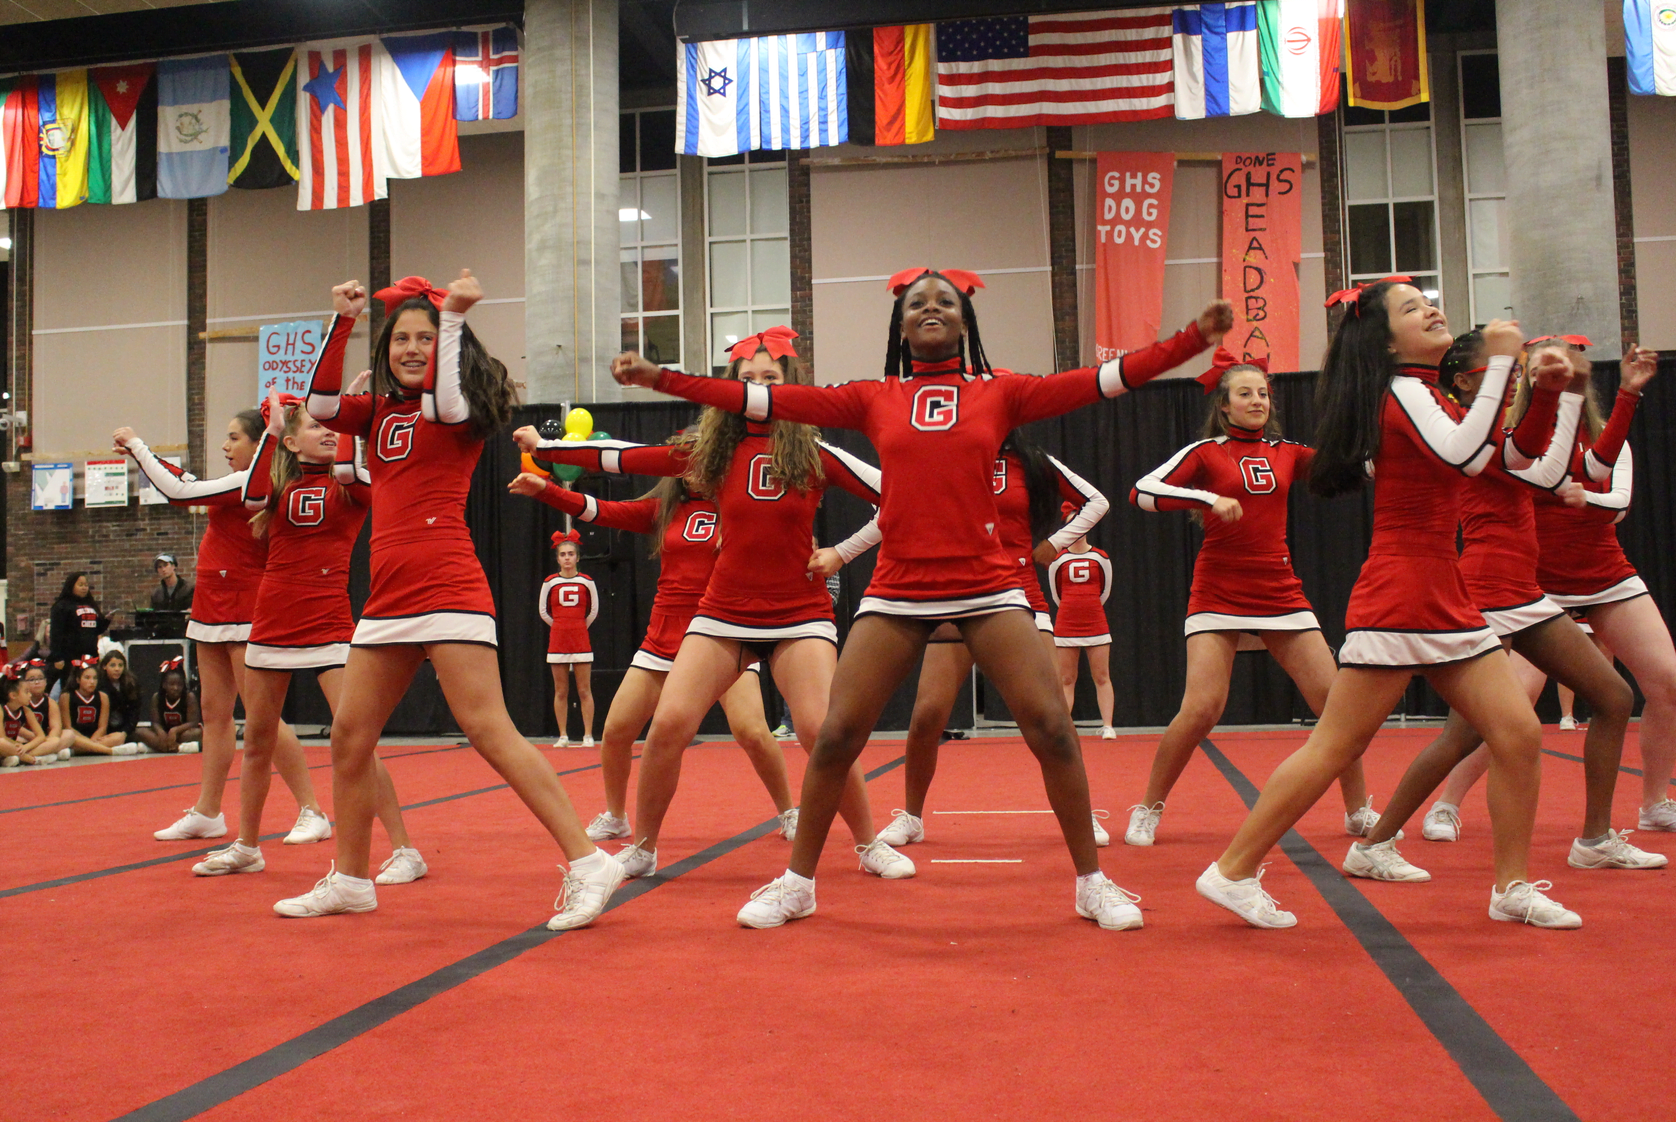 Greenwich High School cheerleaders performed at the GYCL expo in the student center on Nov 5, 2017 Photo: Leslie Yager